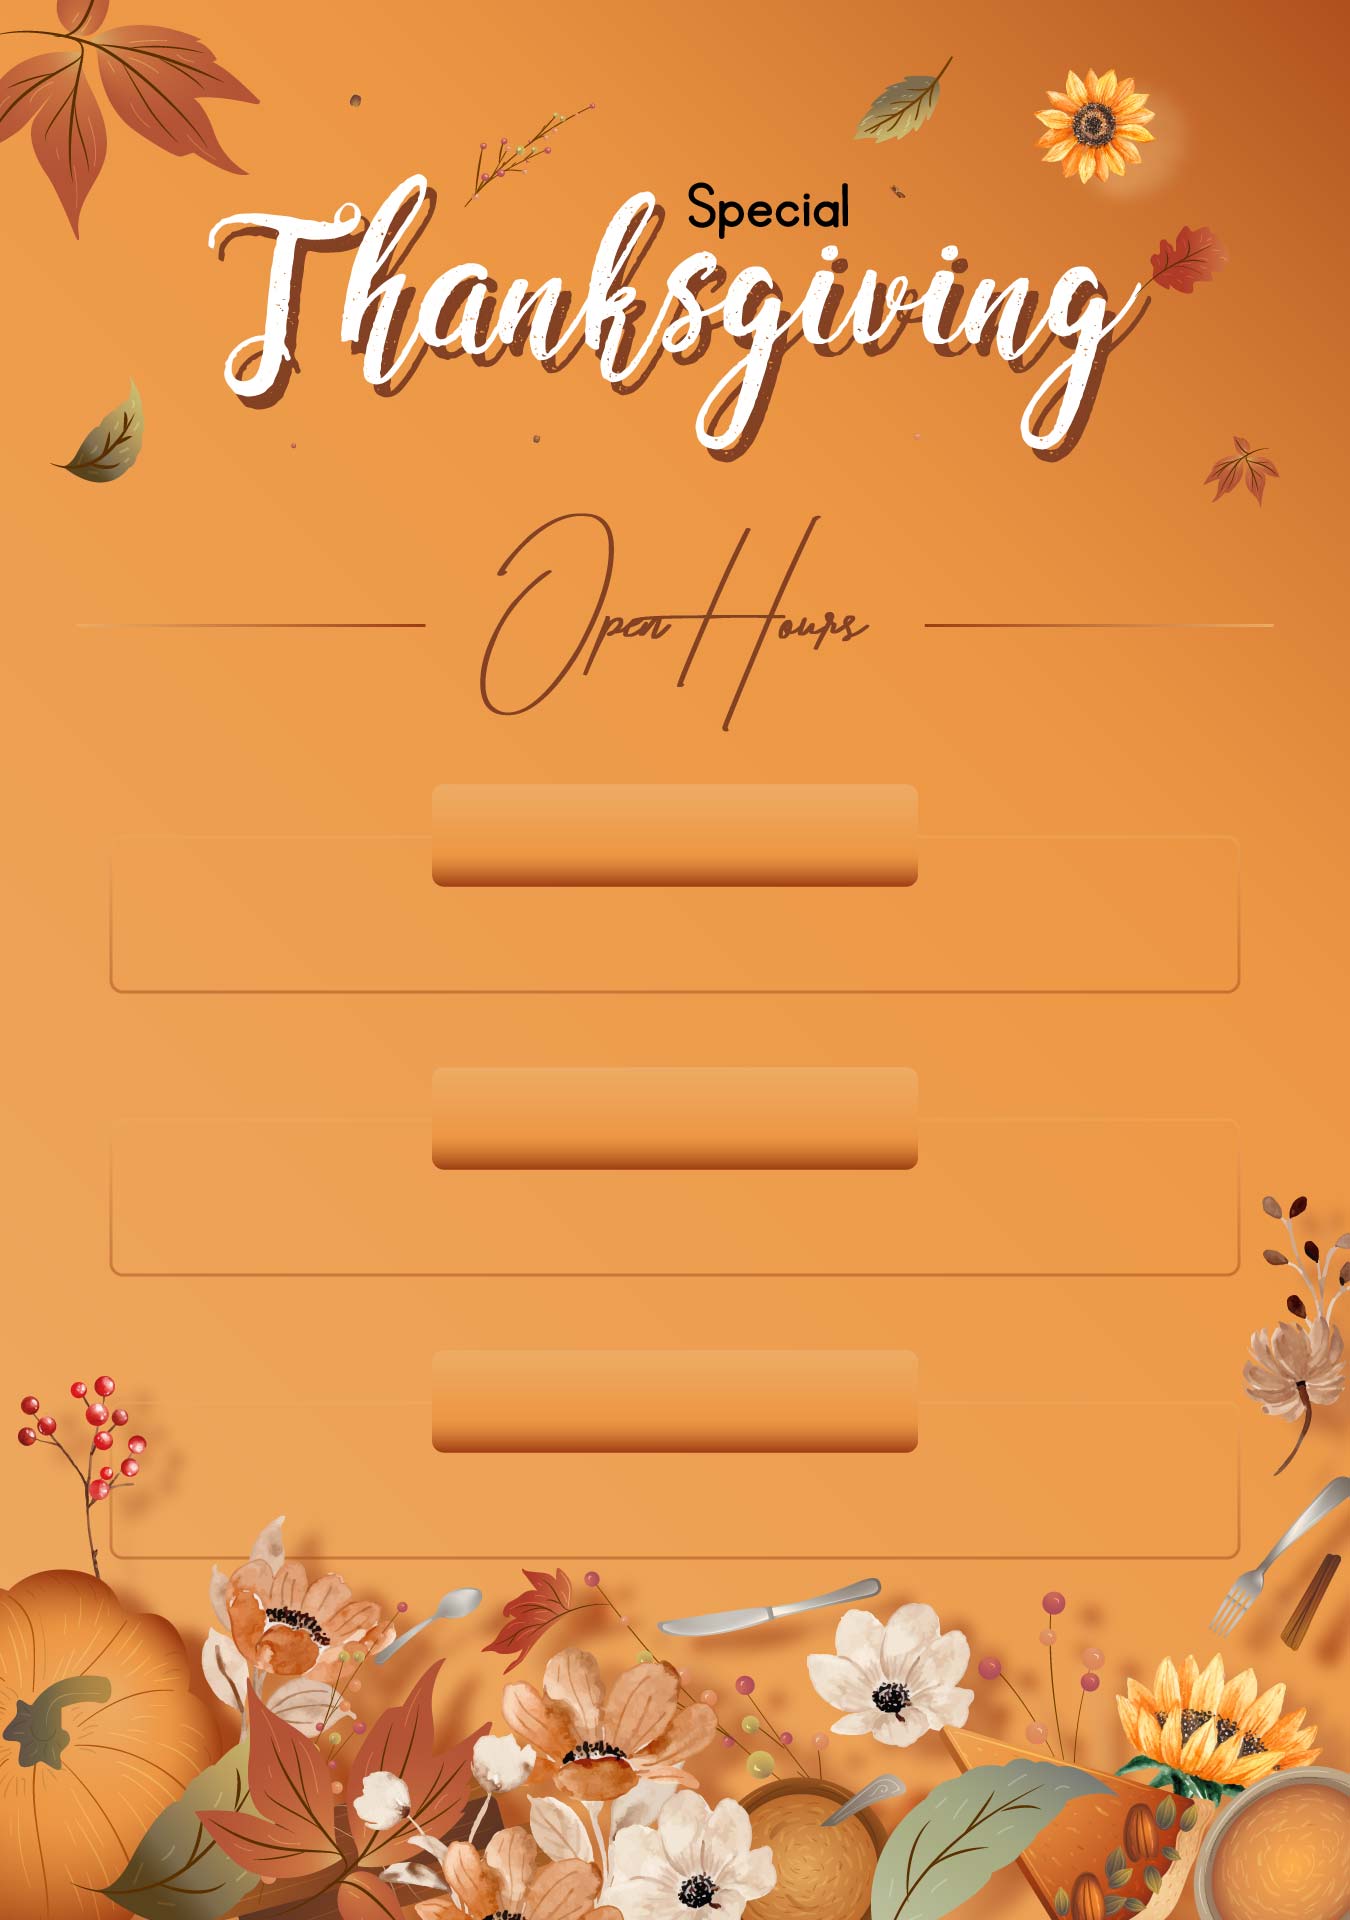 Floral Thanksgiving Open Hours Sign Template